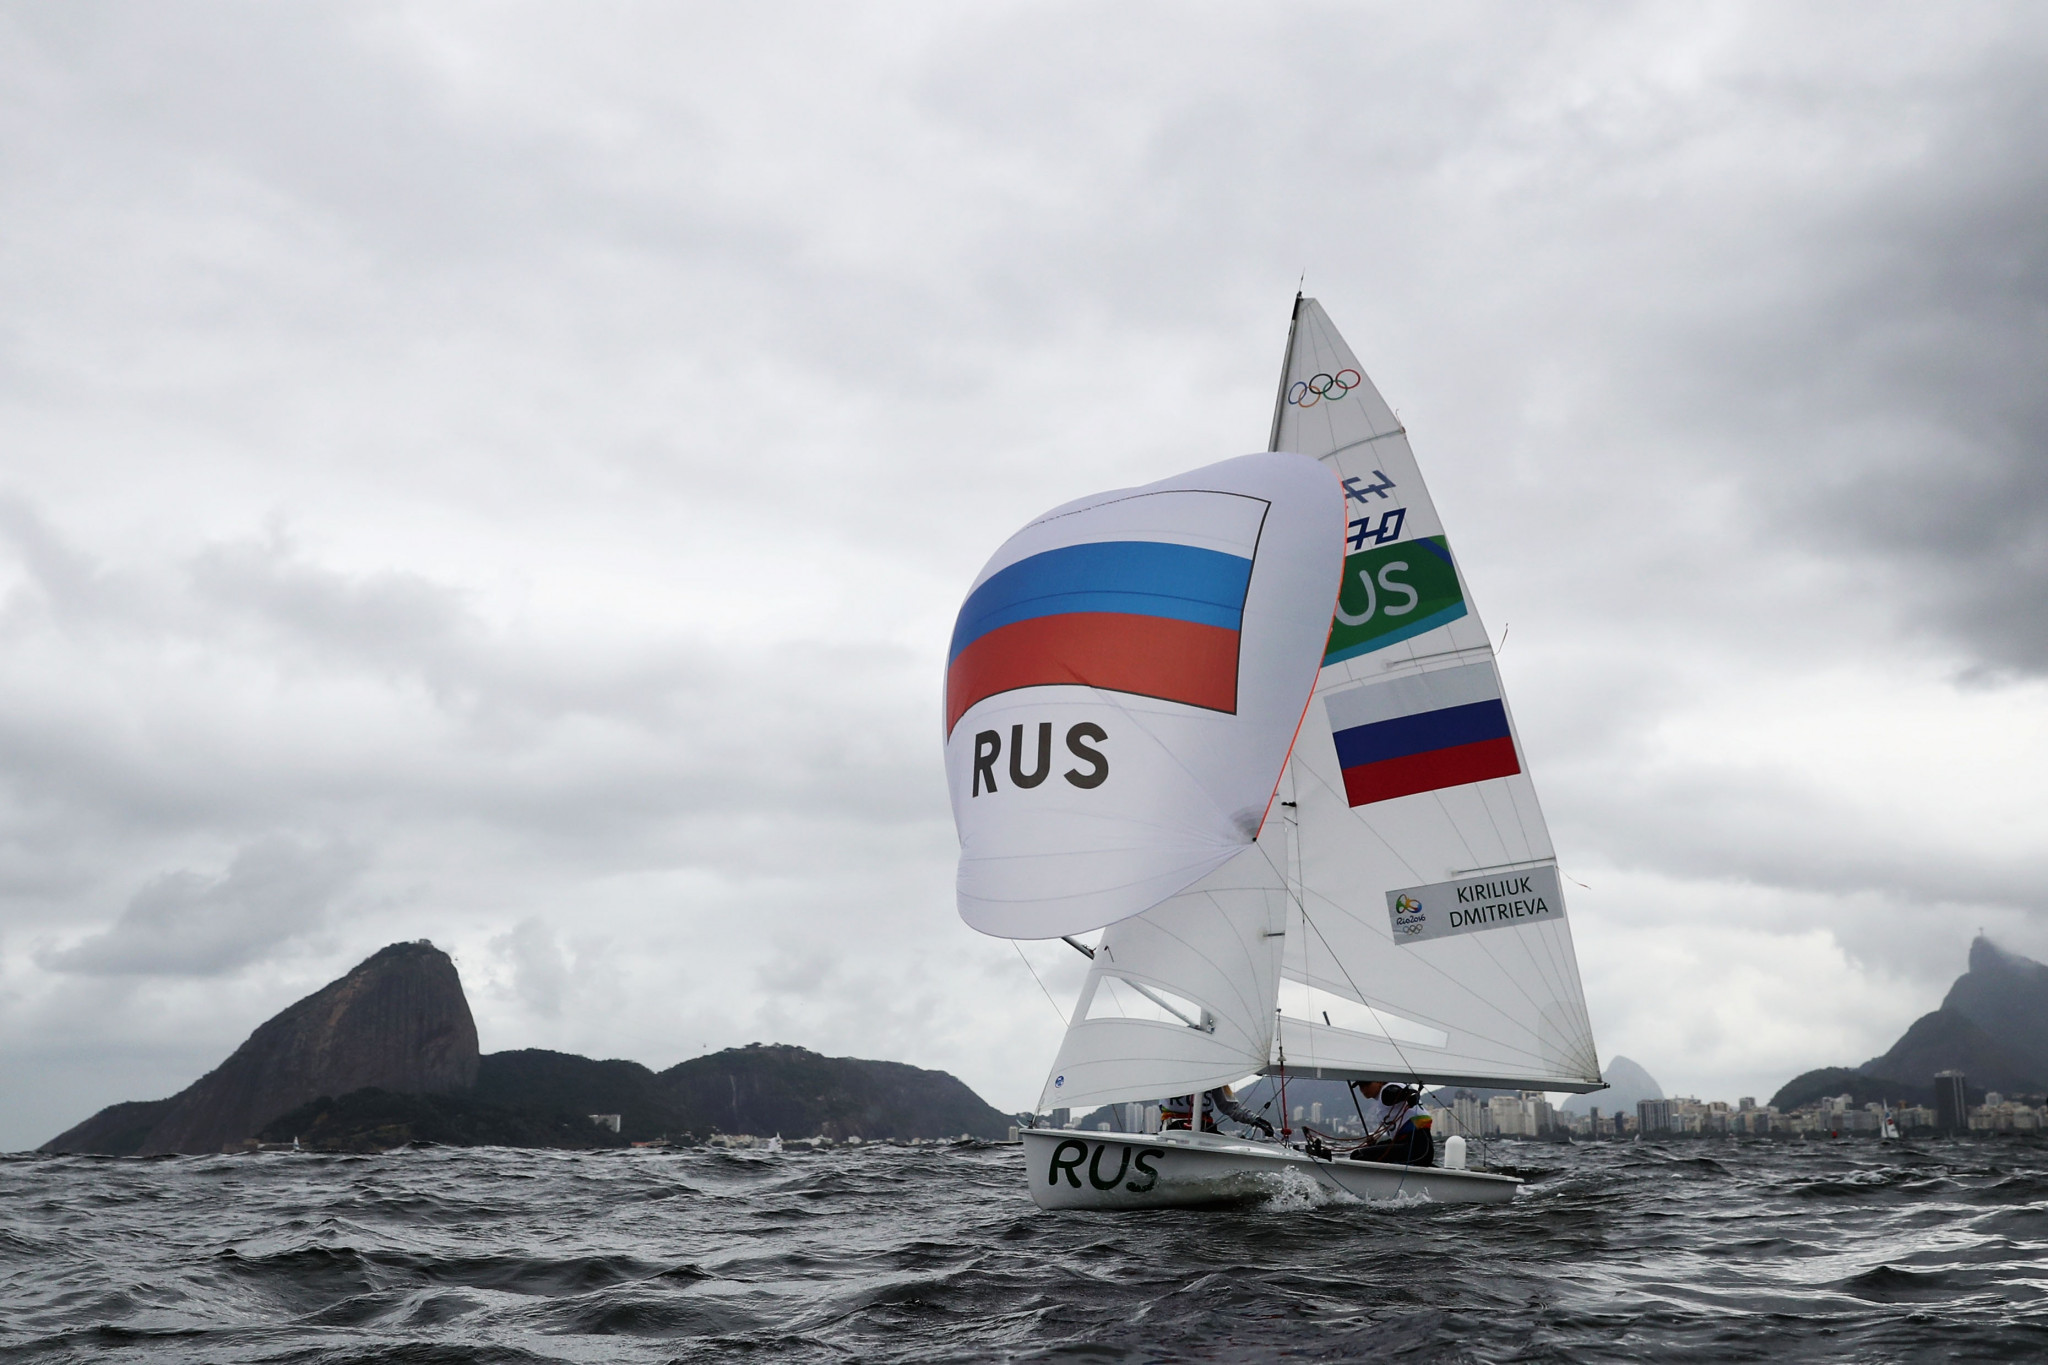 Russian and Belarusian athletes and officials have been banned from World Sailing events in response to the invasion of Ukraine ©Getty Images